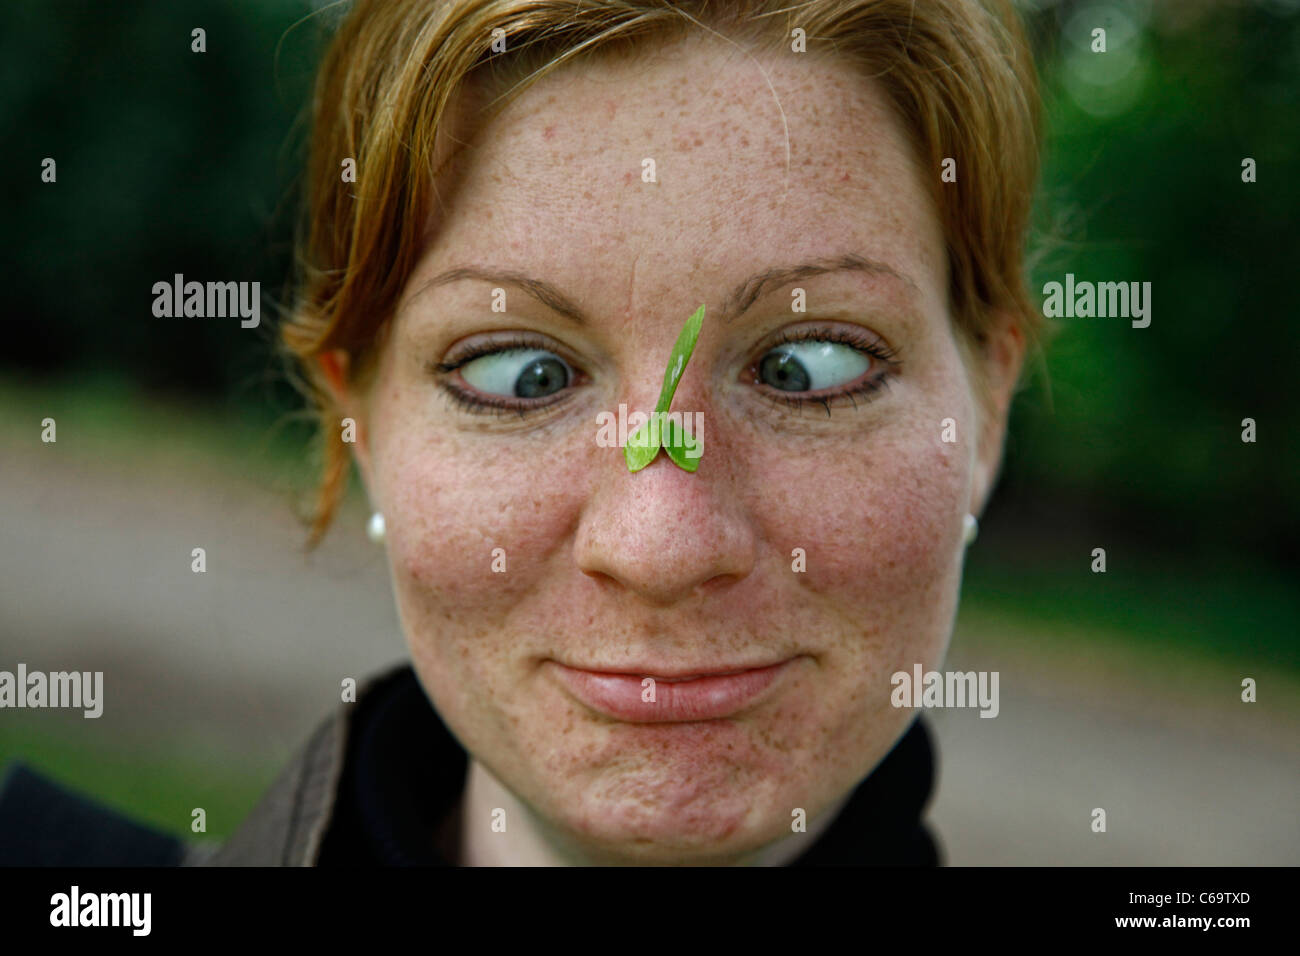 Woman with a leaf on her nose pulling funny face with eyes crossed Stock Photo